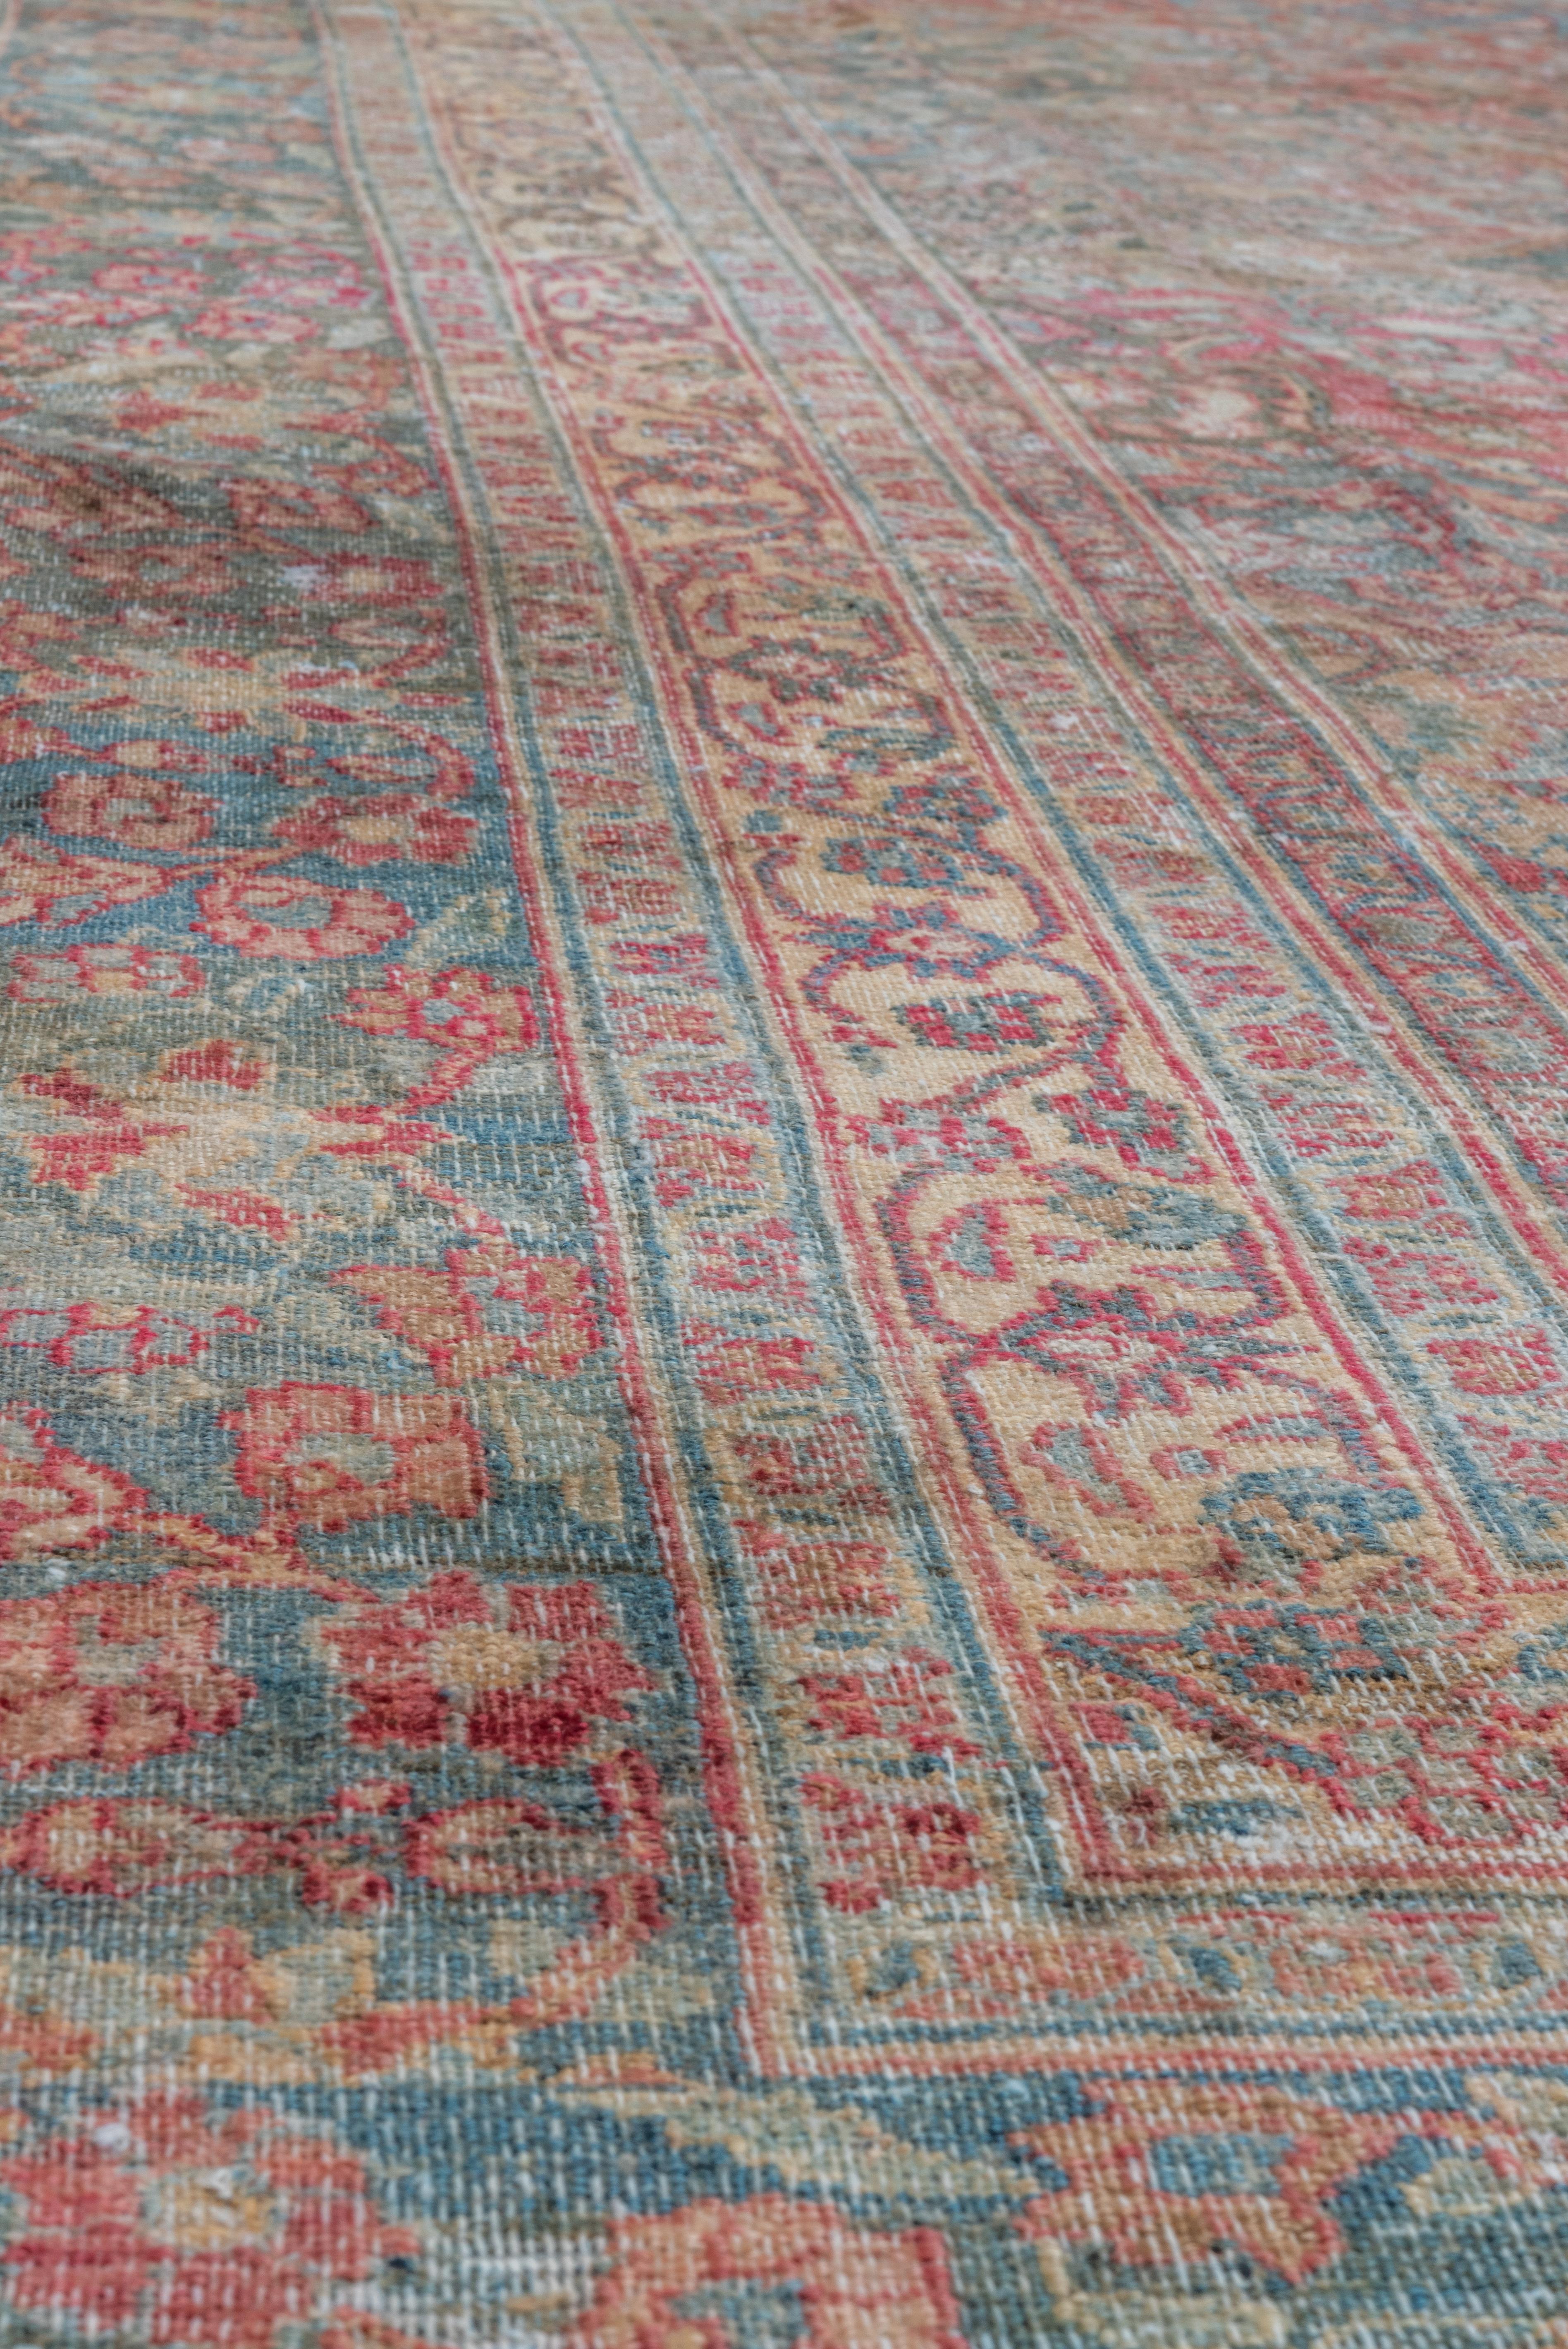 Mid-20th Century Shabby Chic Persian Khorassan Rug with Pink & Teal Tones, Circa 1930s For Sale